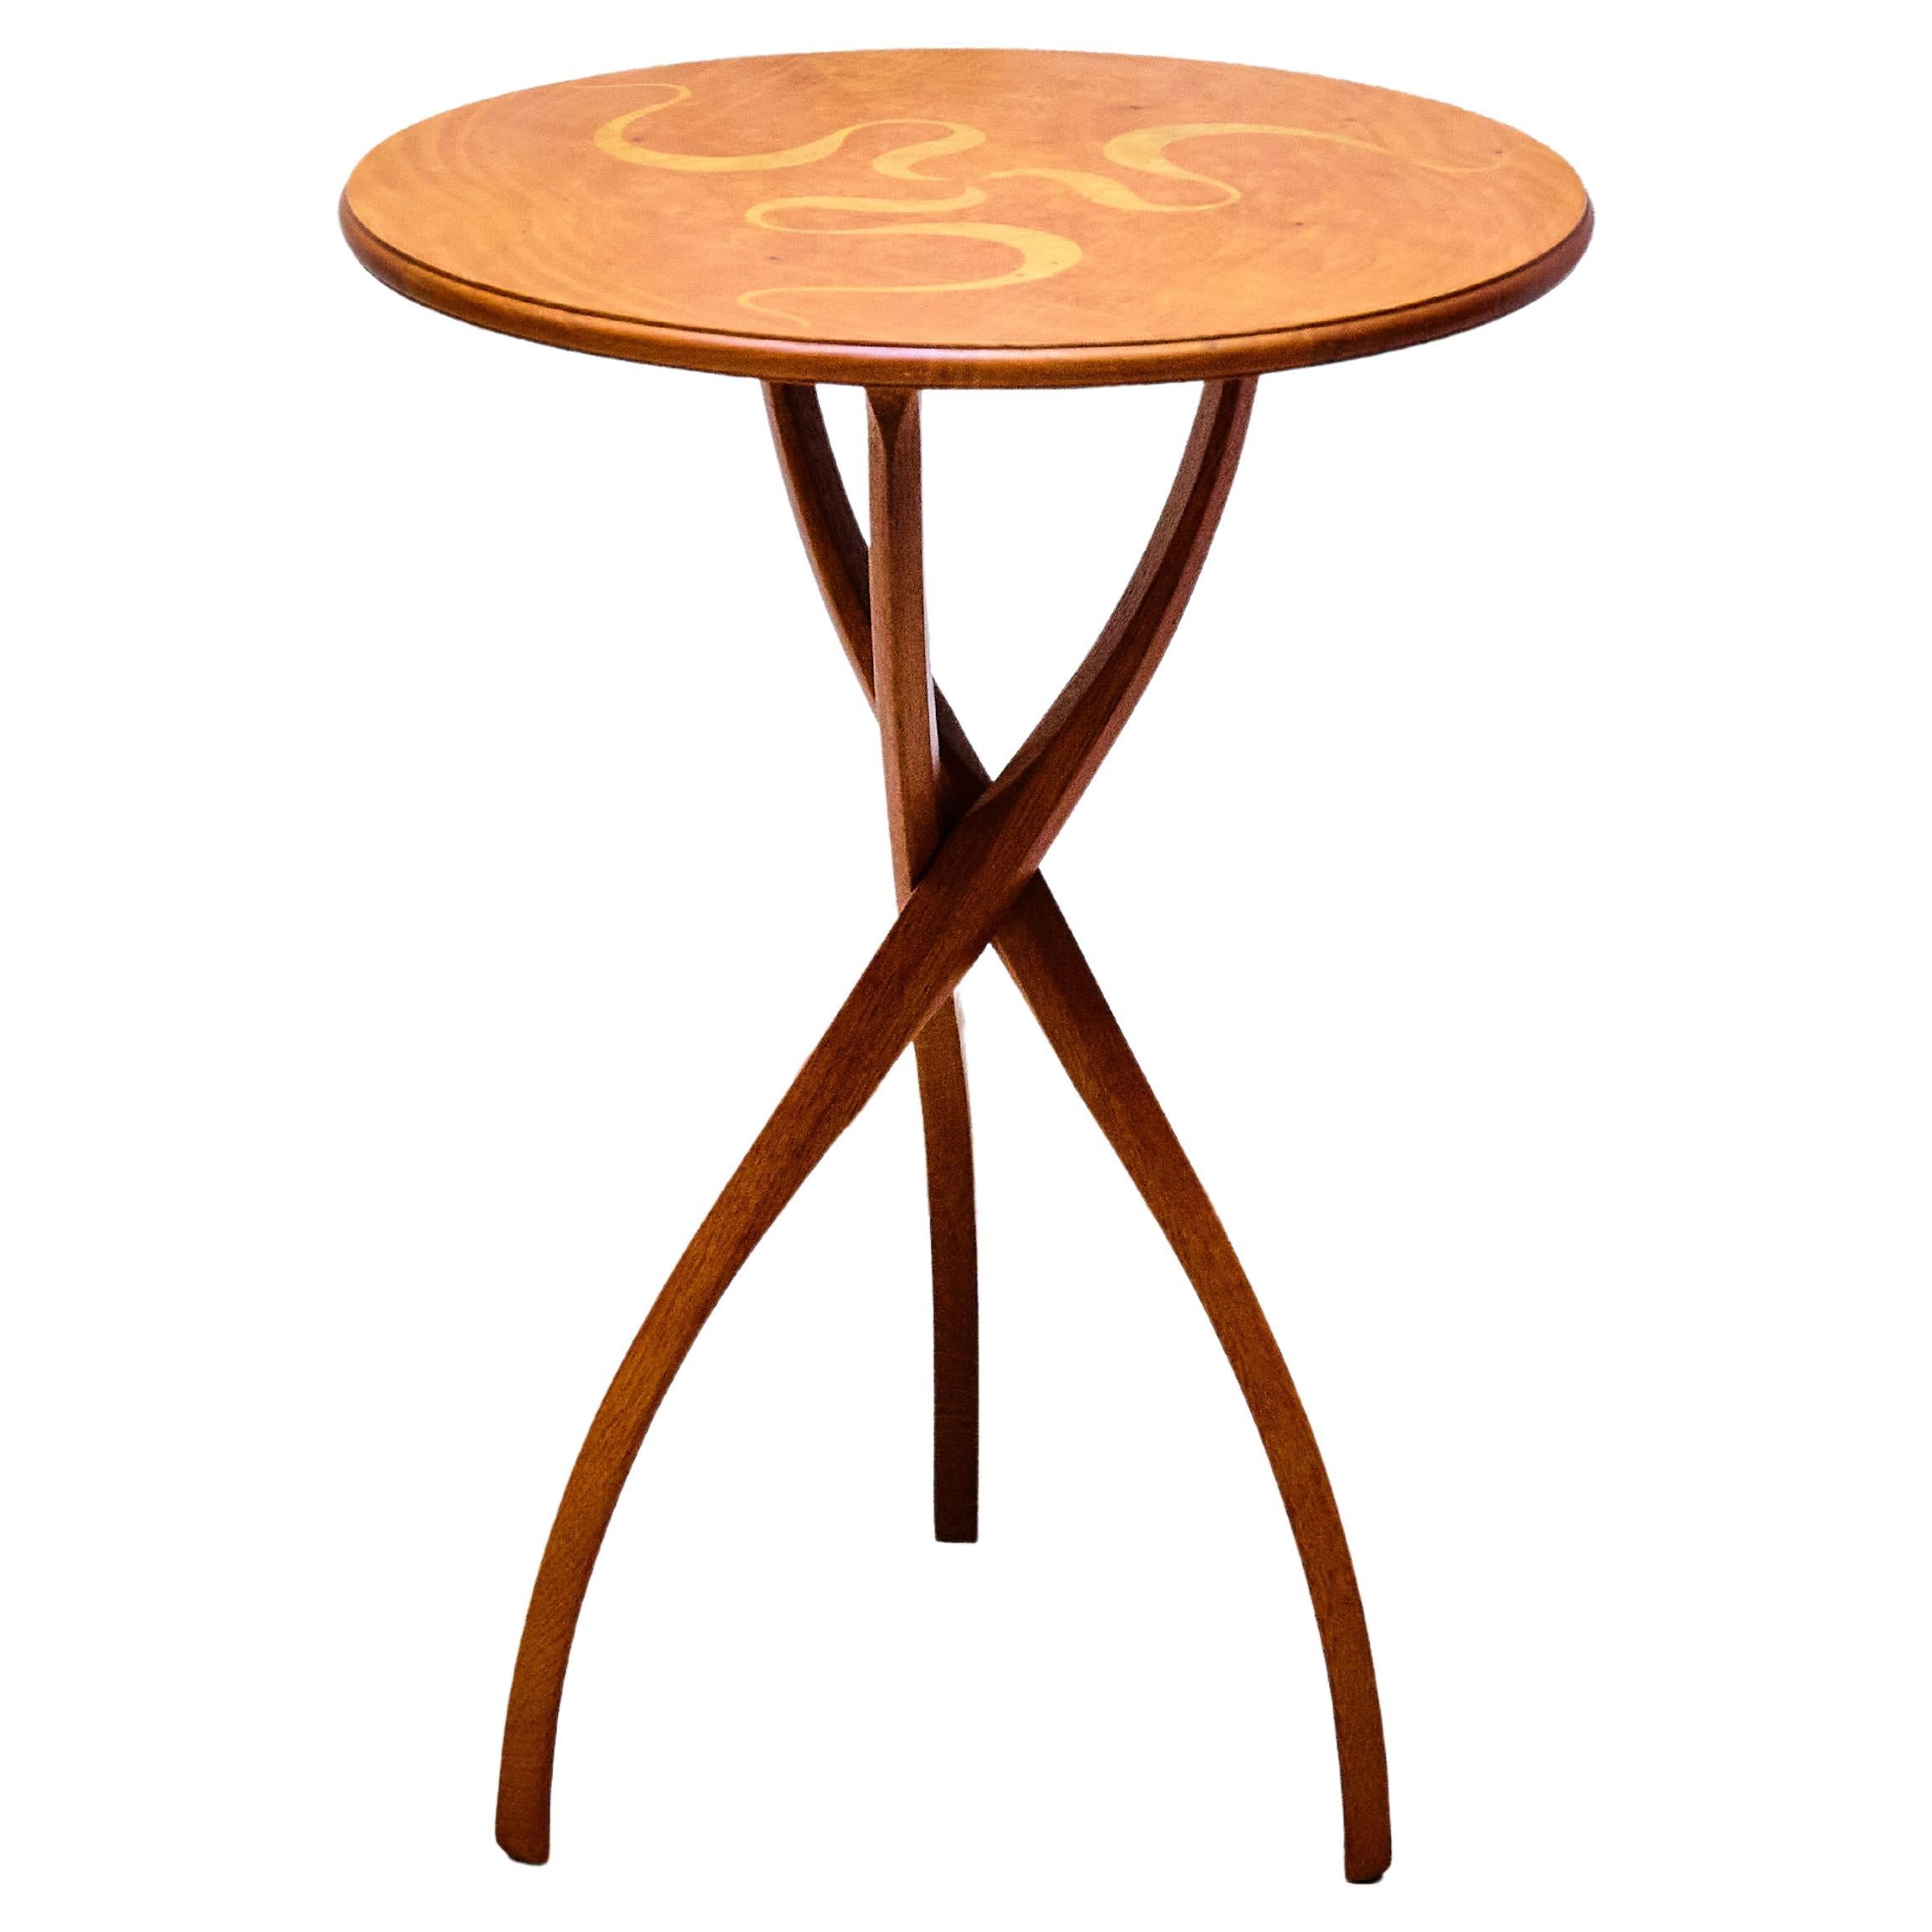 Oscar Tusquets Wood Side Table 'Vortice' for Carlos Jané, circa 1989 For Sale